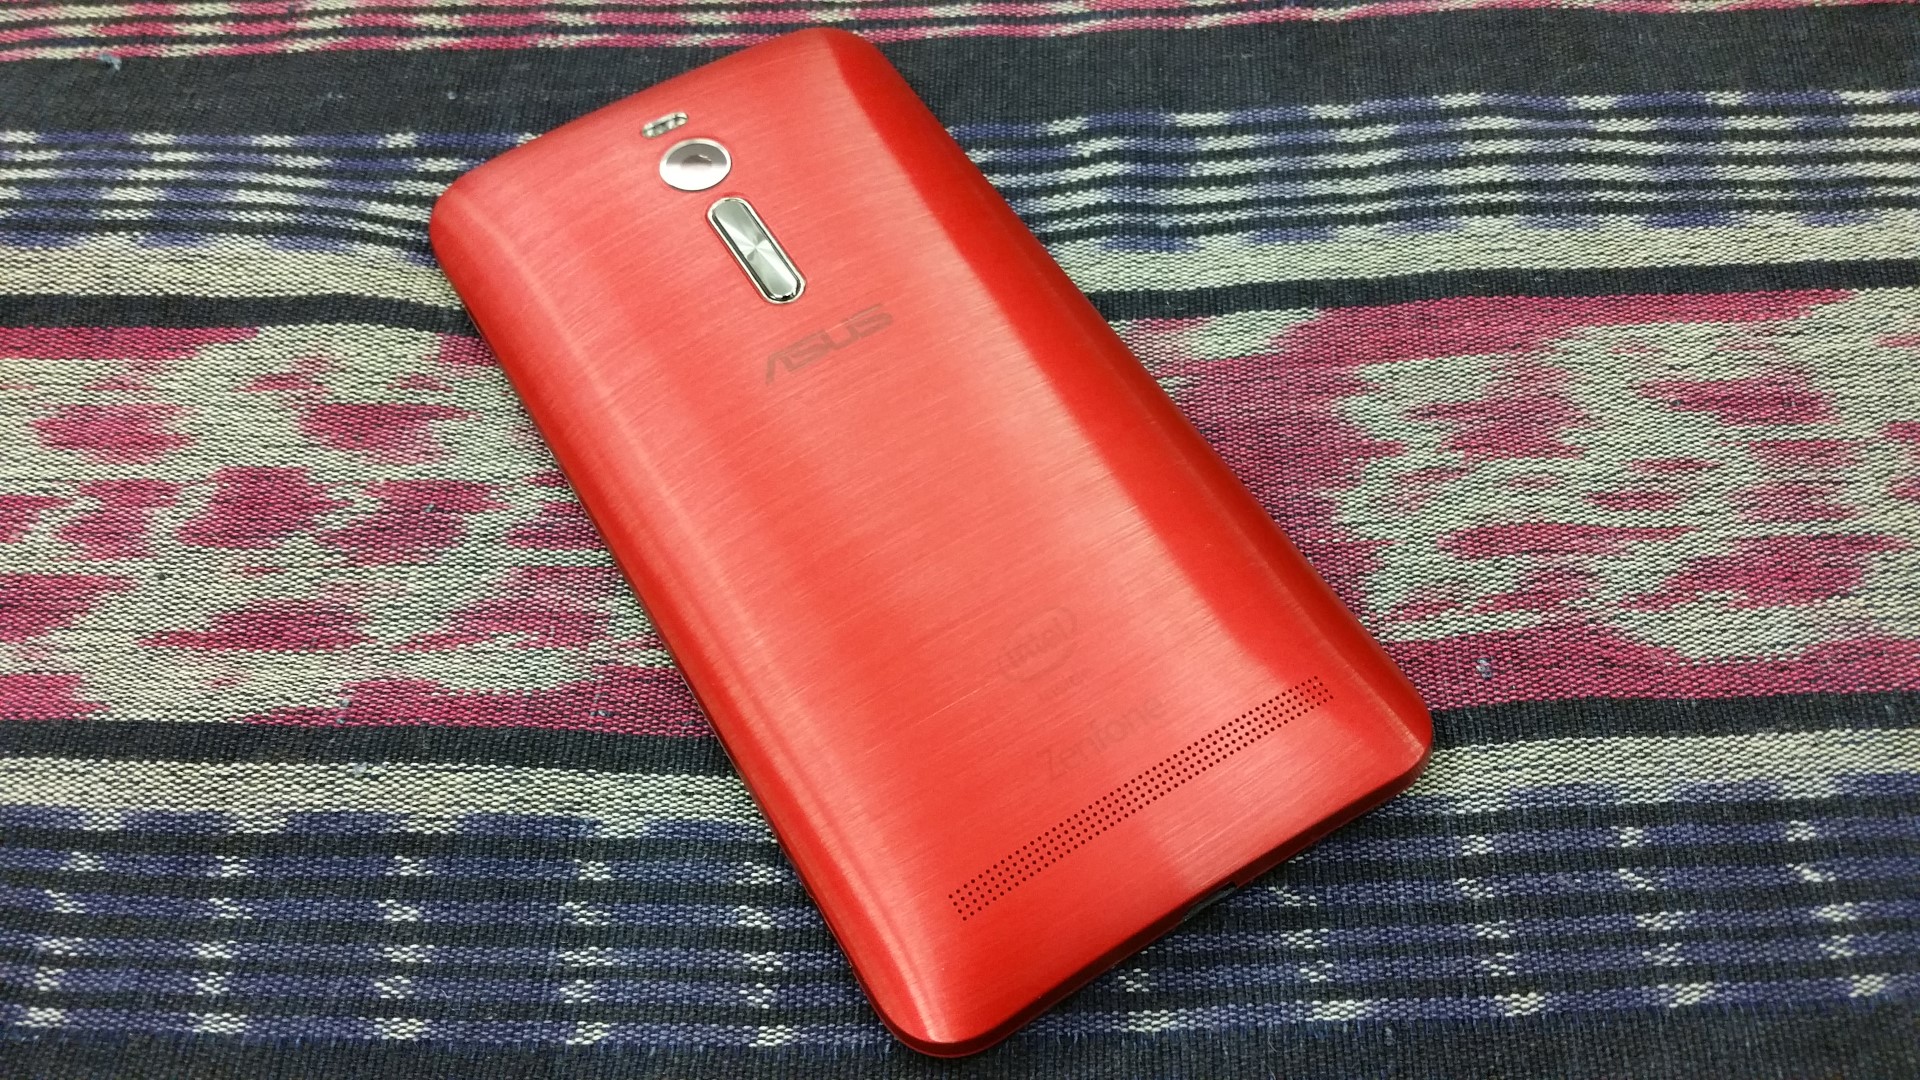 ASUS Zenfone 2 crowned king of fast charging 28